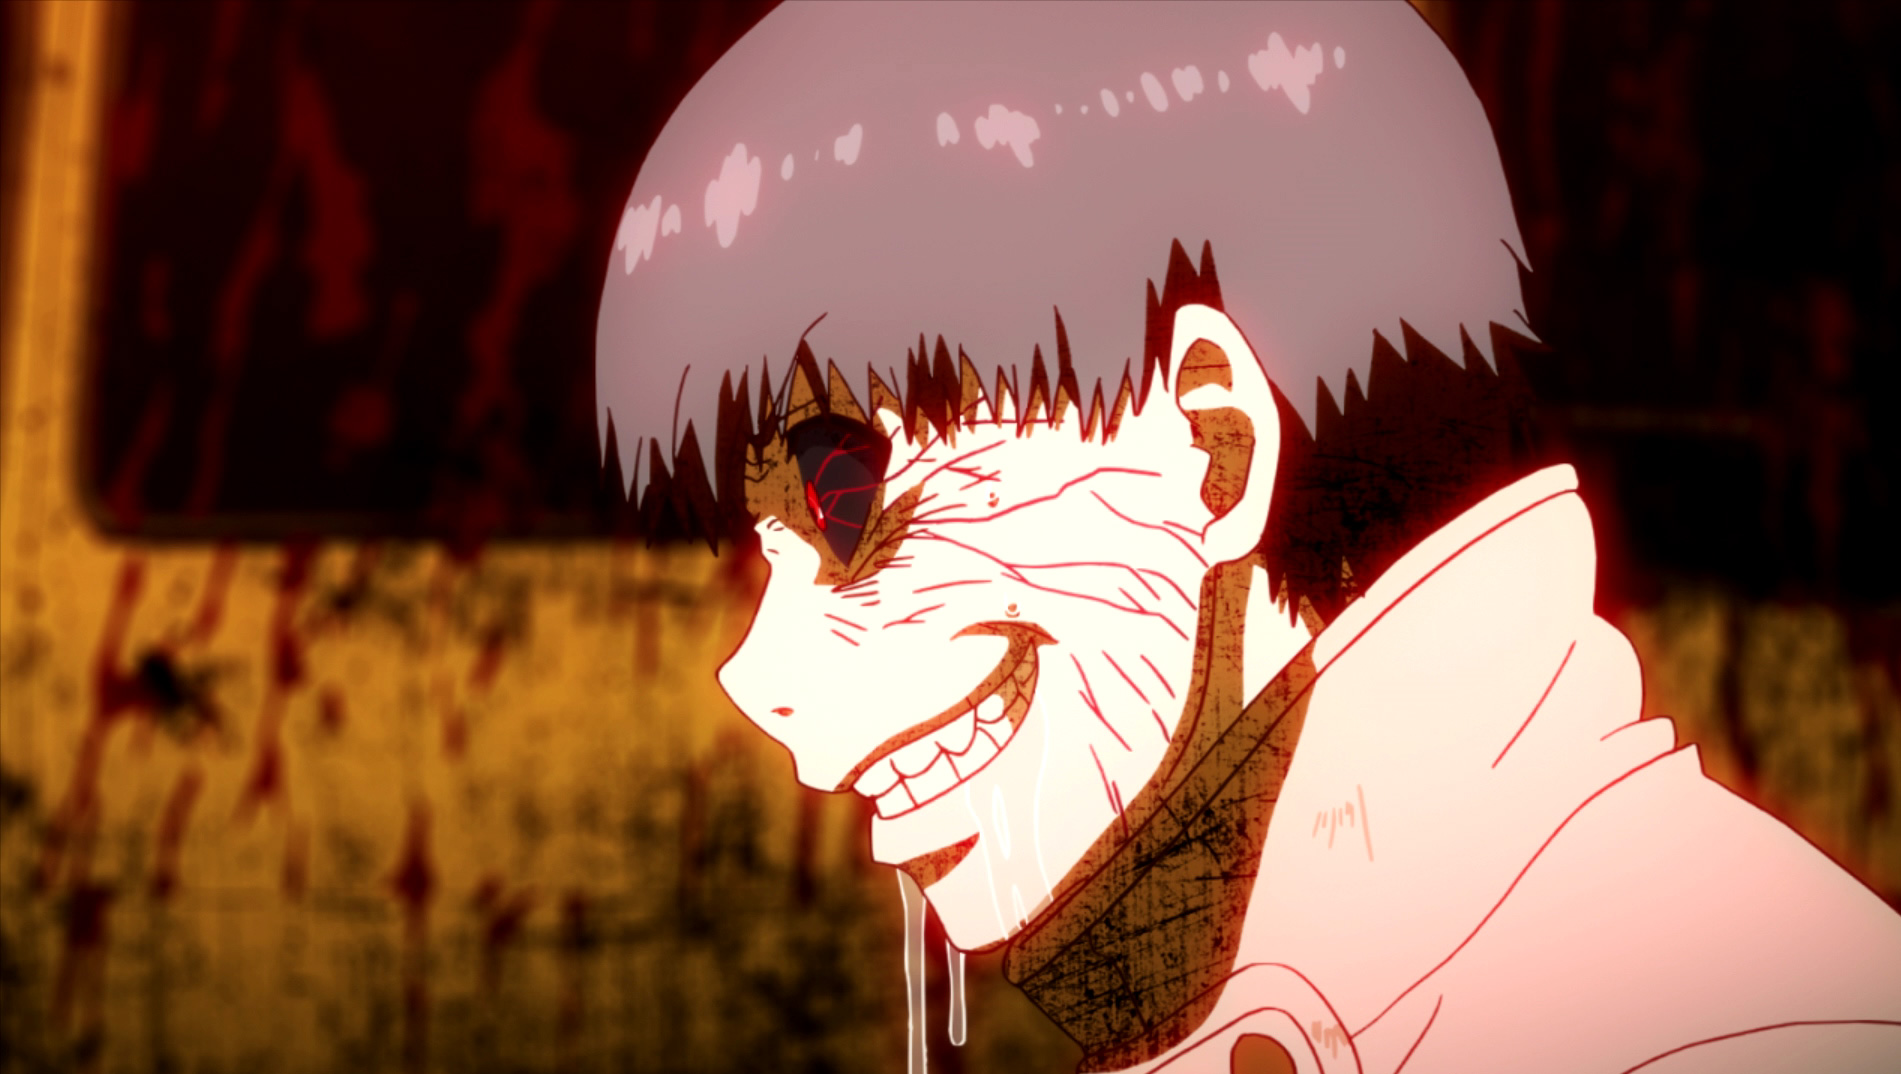 Tokyo Ghoul Episode 10 English Sub - Colaboratory